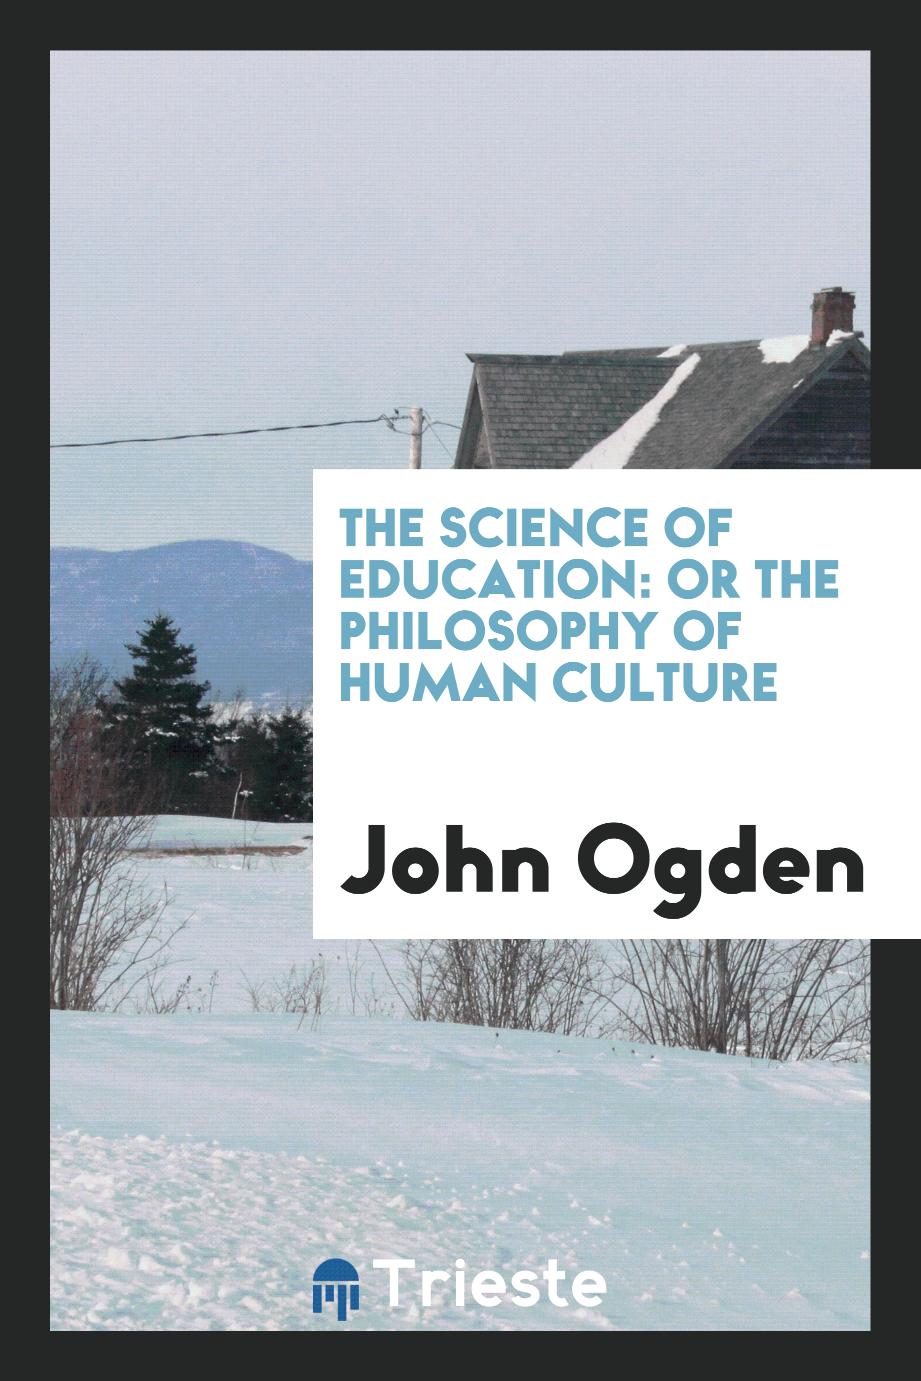 The Science of Education: Or the Philosophy of Human Culture